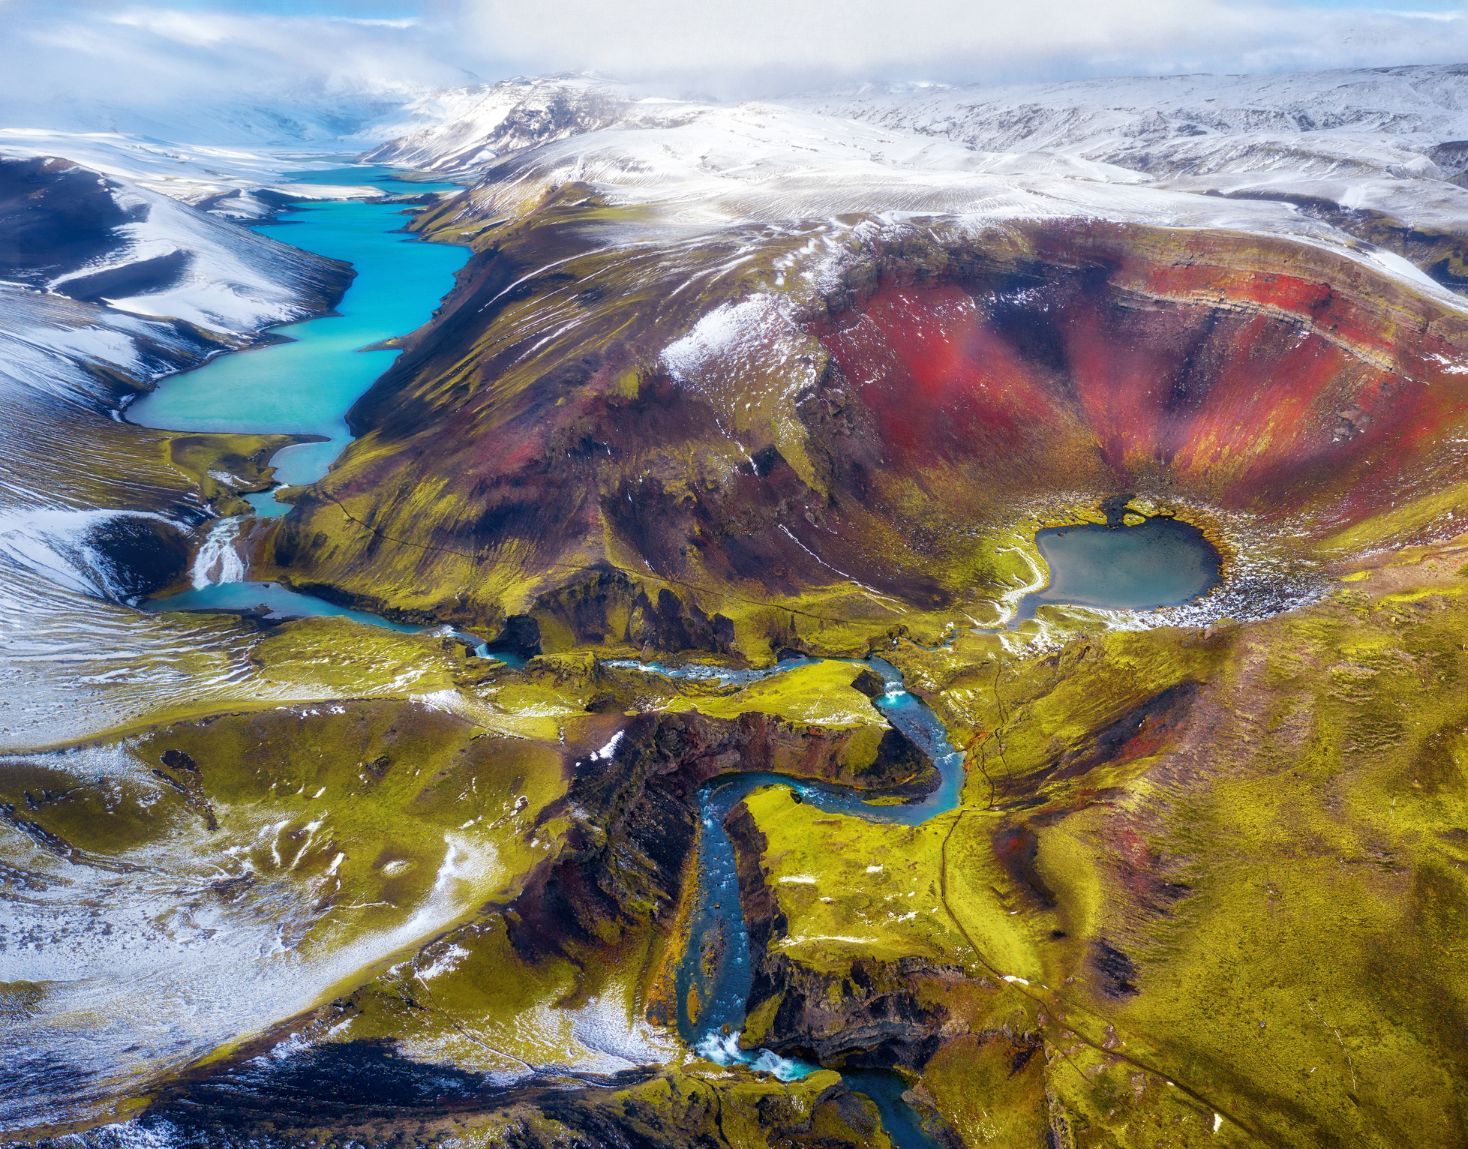 The stunning craters, rivers and lagoons of Iceland's highlands